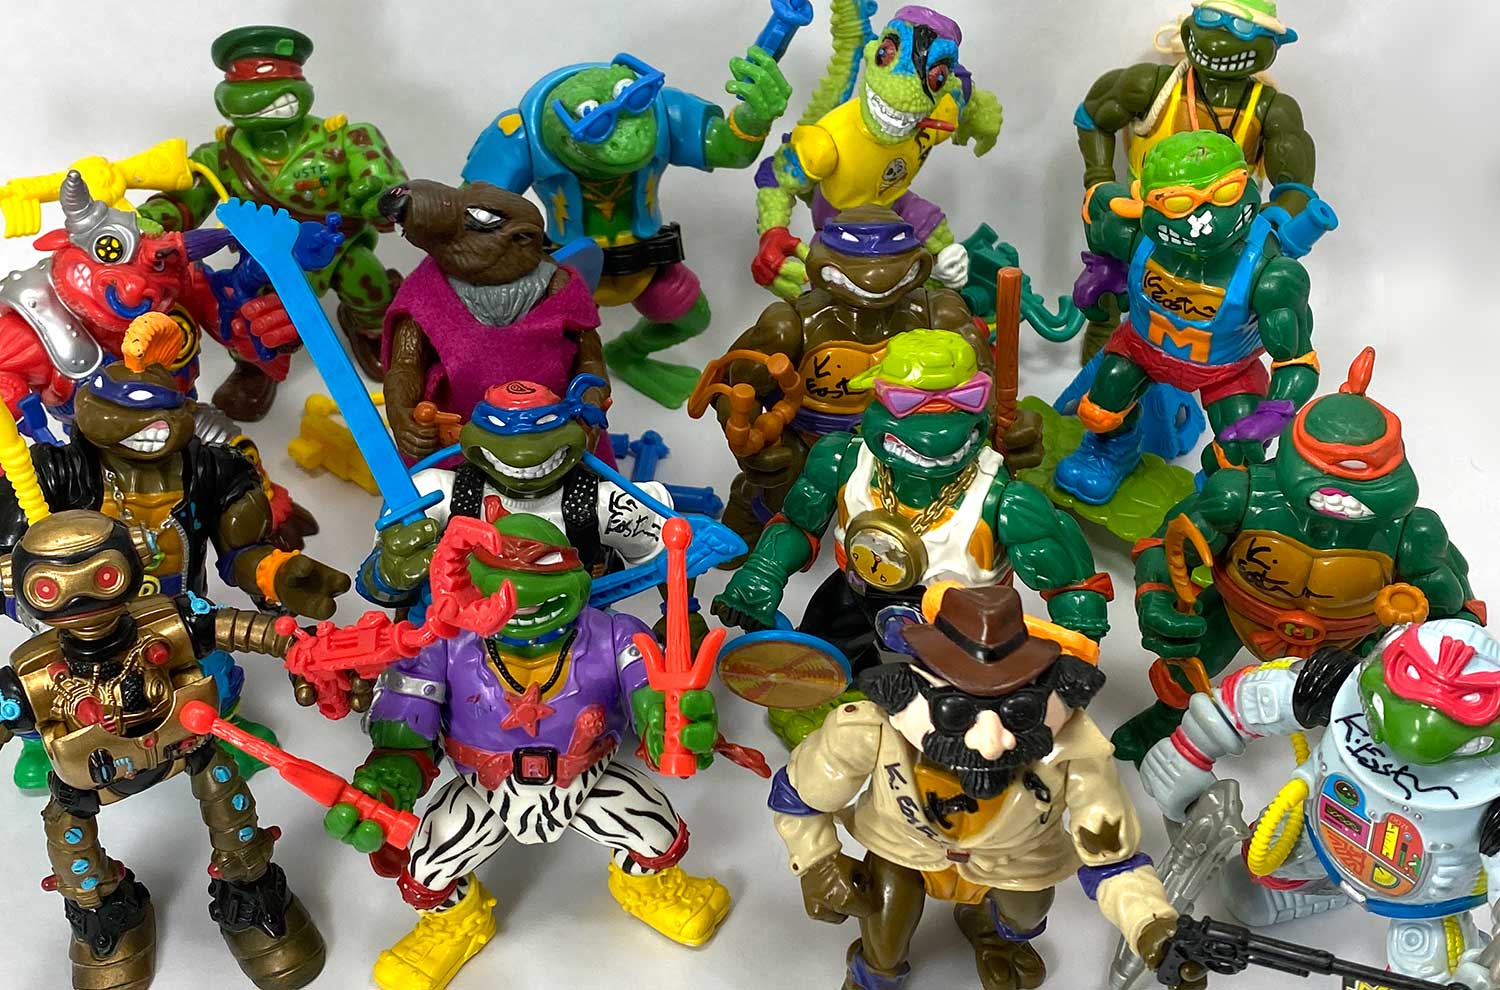 Vintage Signed TMNT Toys with Original Weapon Trees